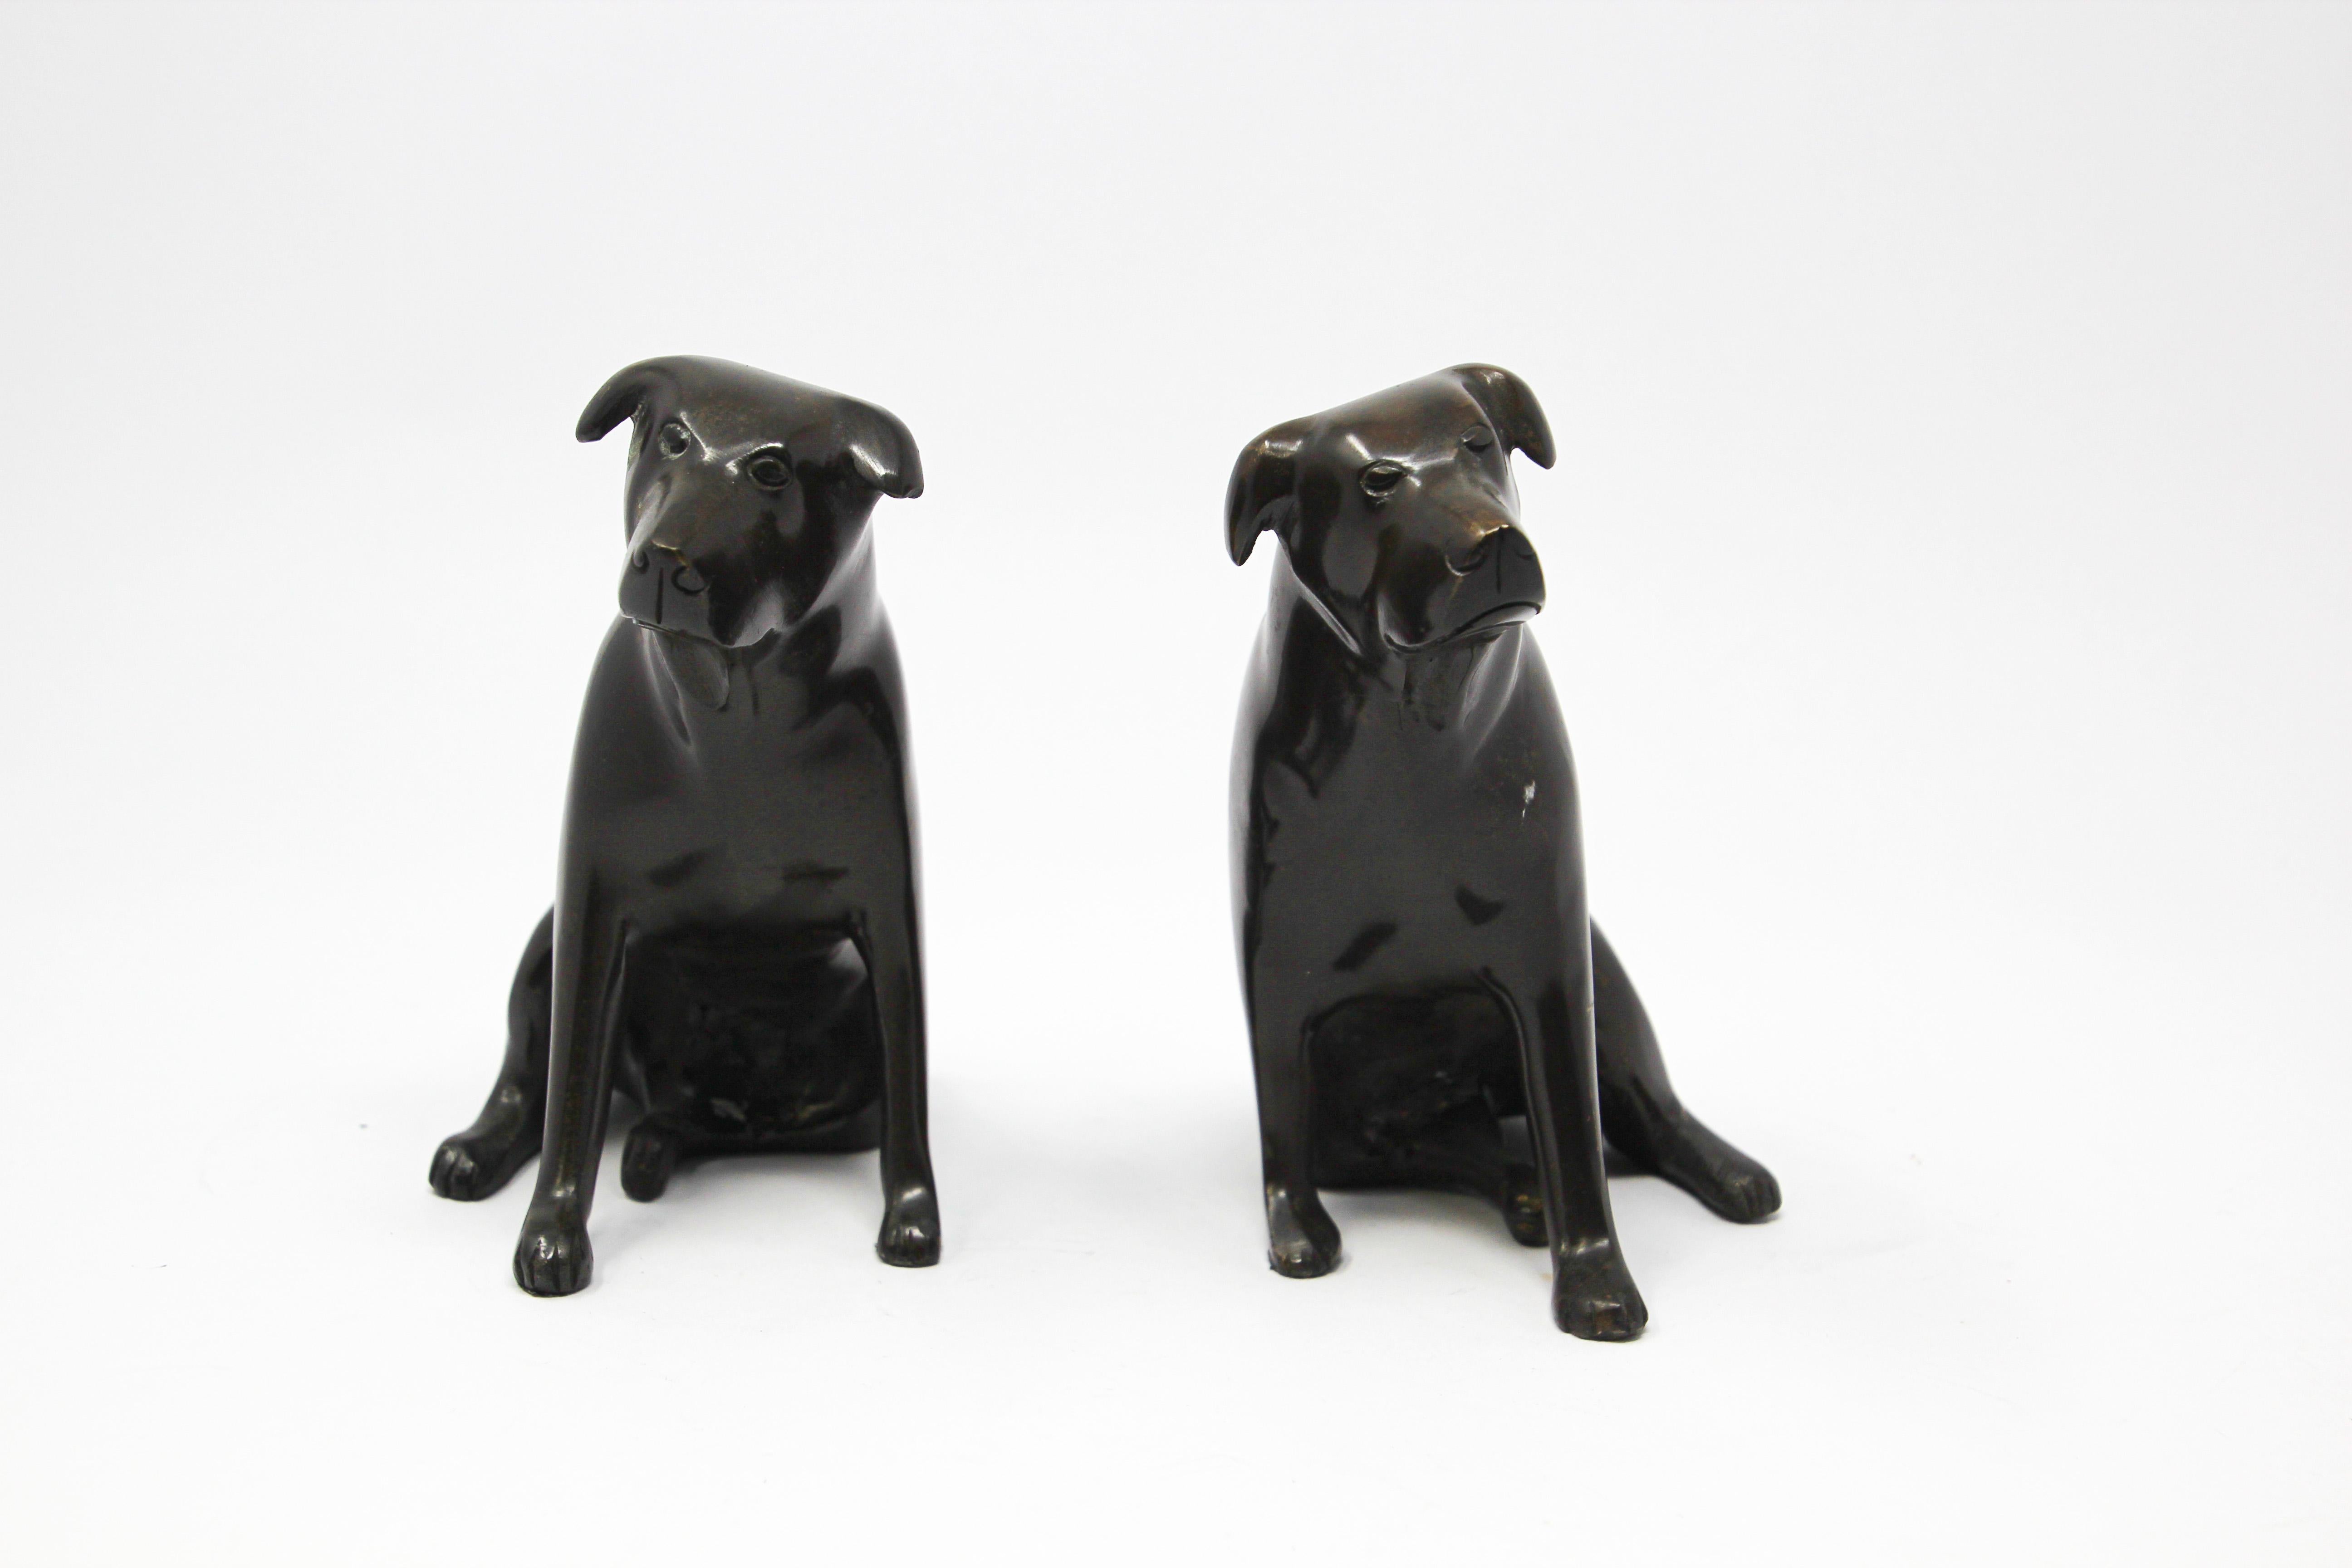 American Set of Cast Metal Sculpture of Labrador Dogs Bookends